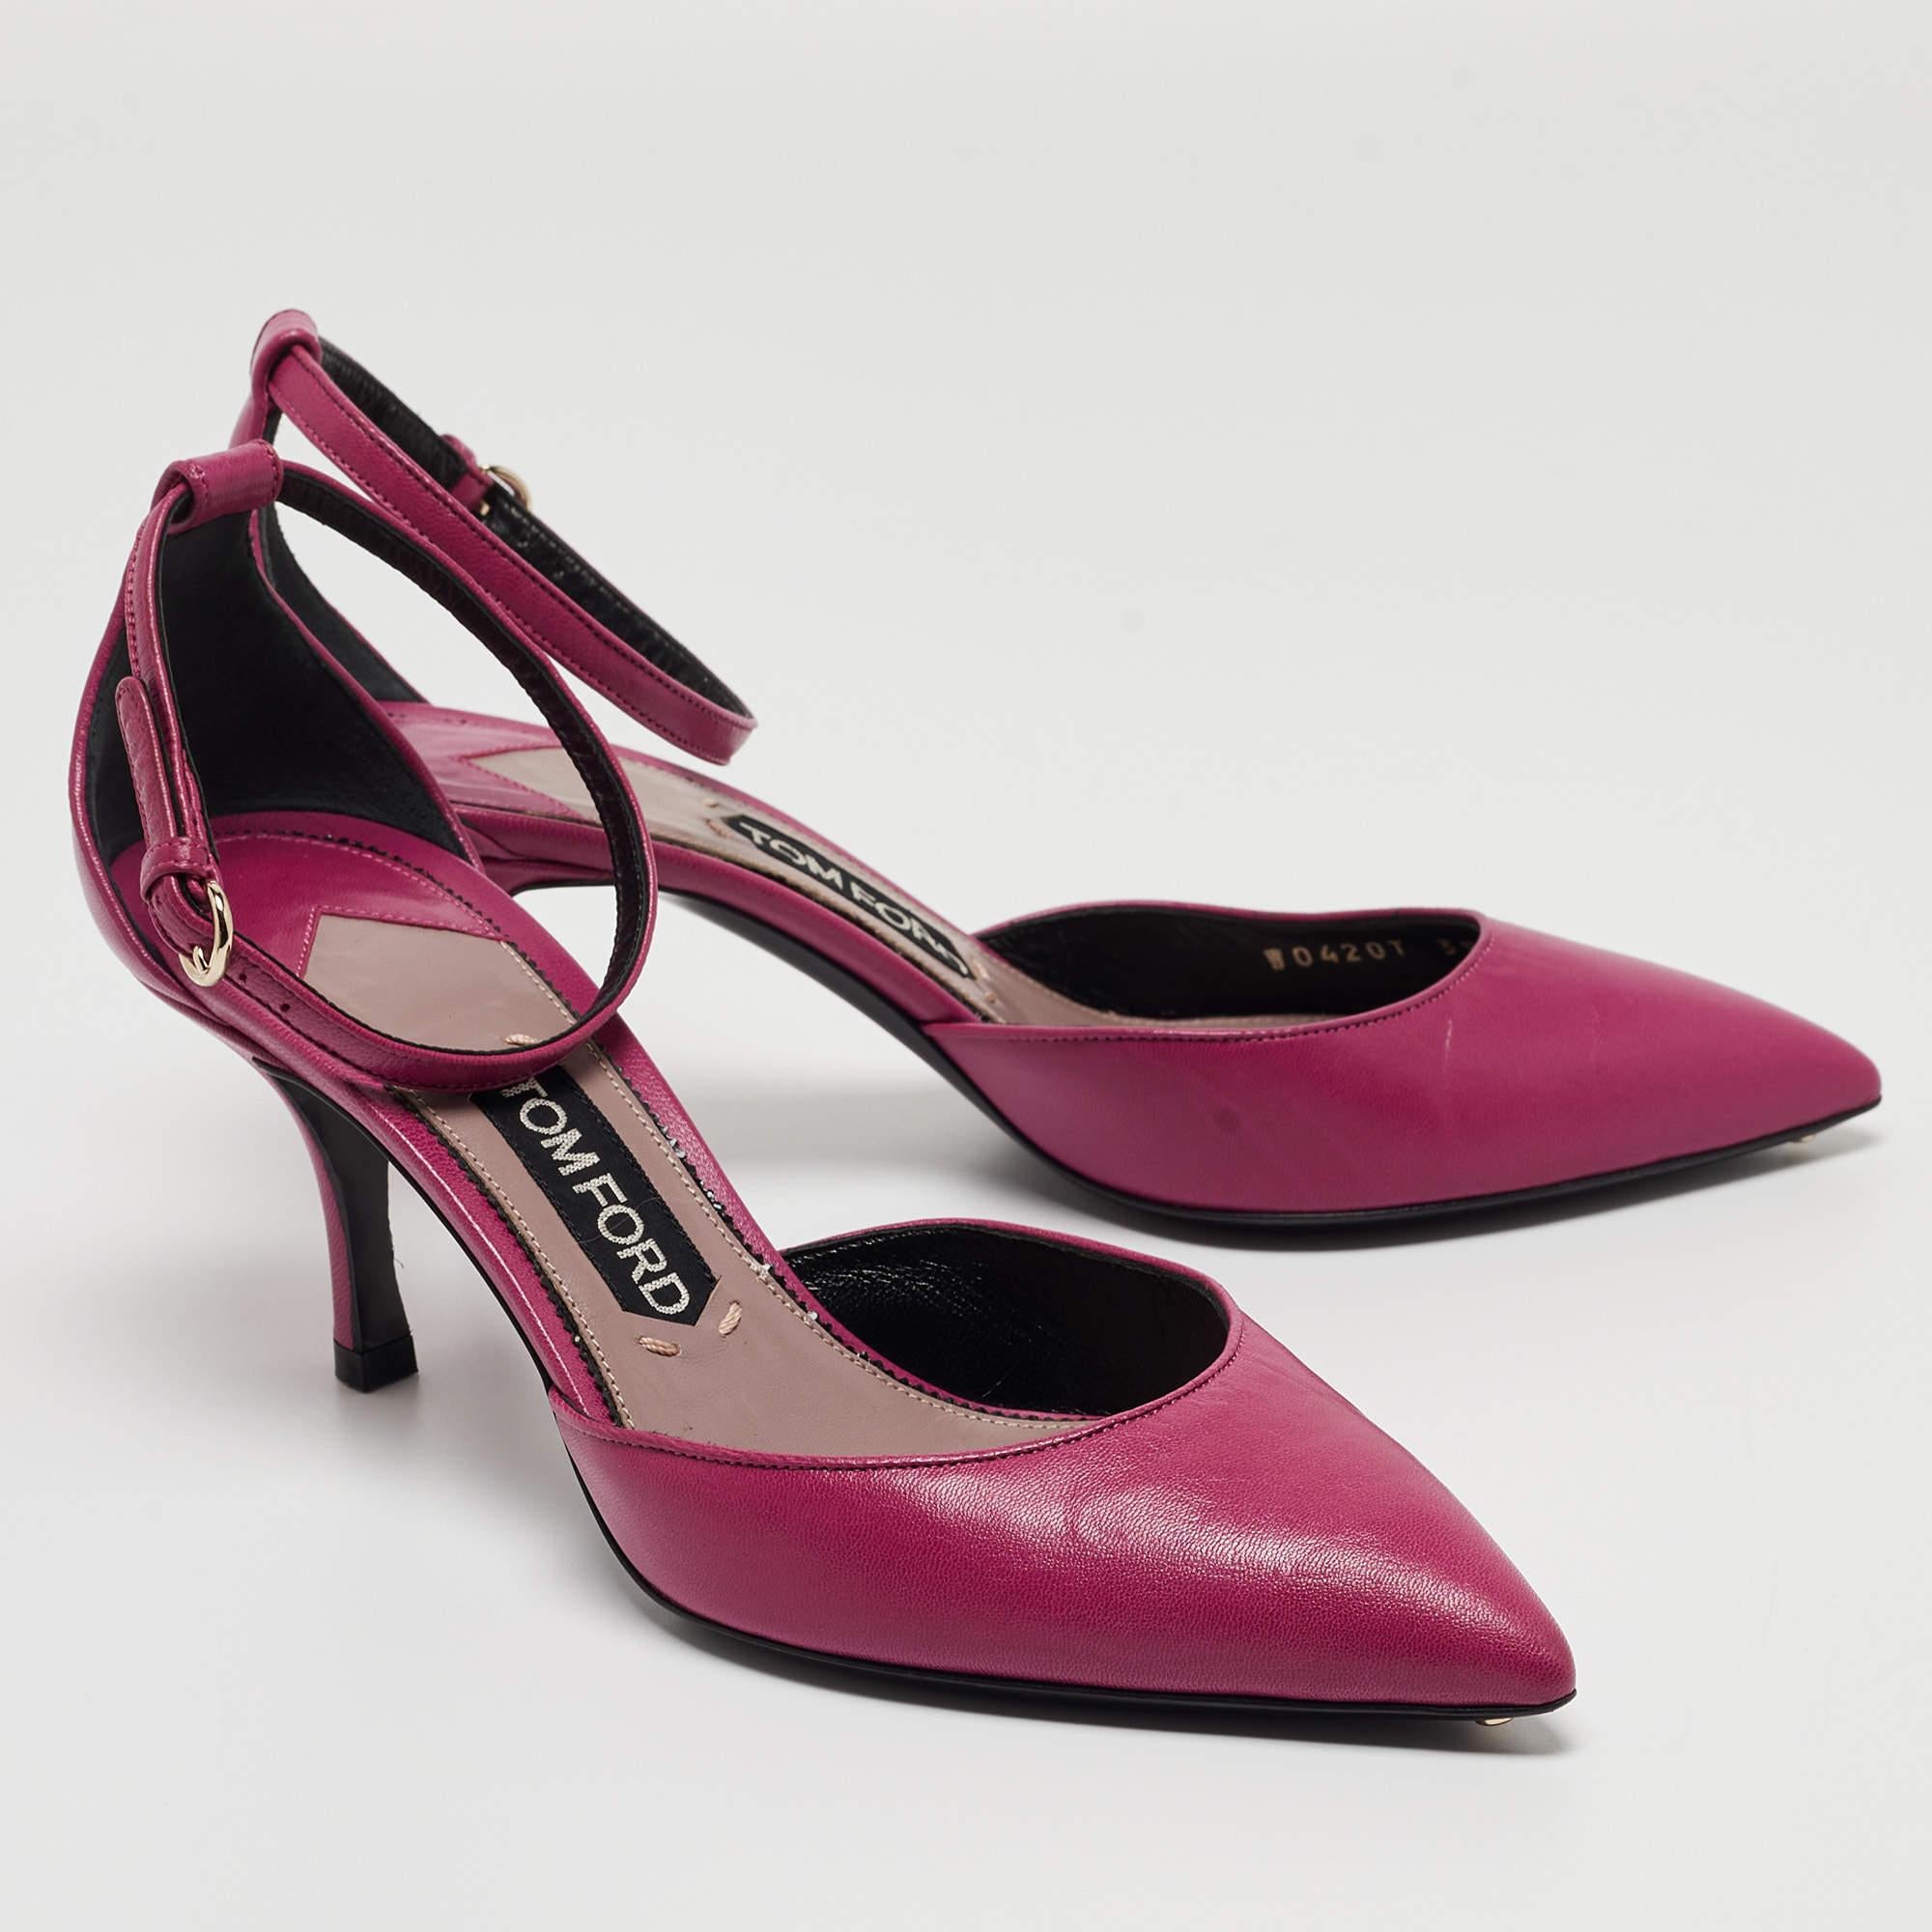 Tom Ford Purple Leather Ankle Strap D'orsay Pumps Size 39 In Excellent Condition For Sale In Dubai, Al Qouz 2